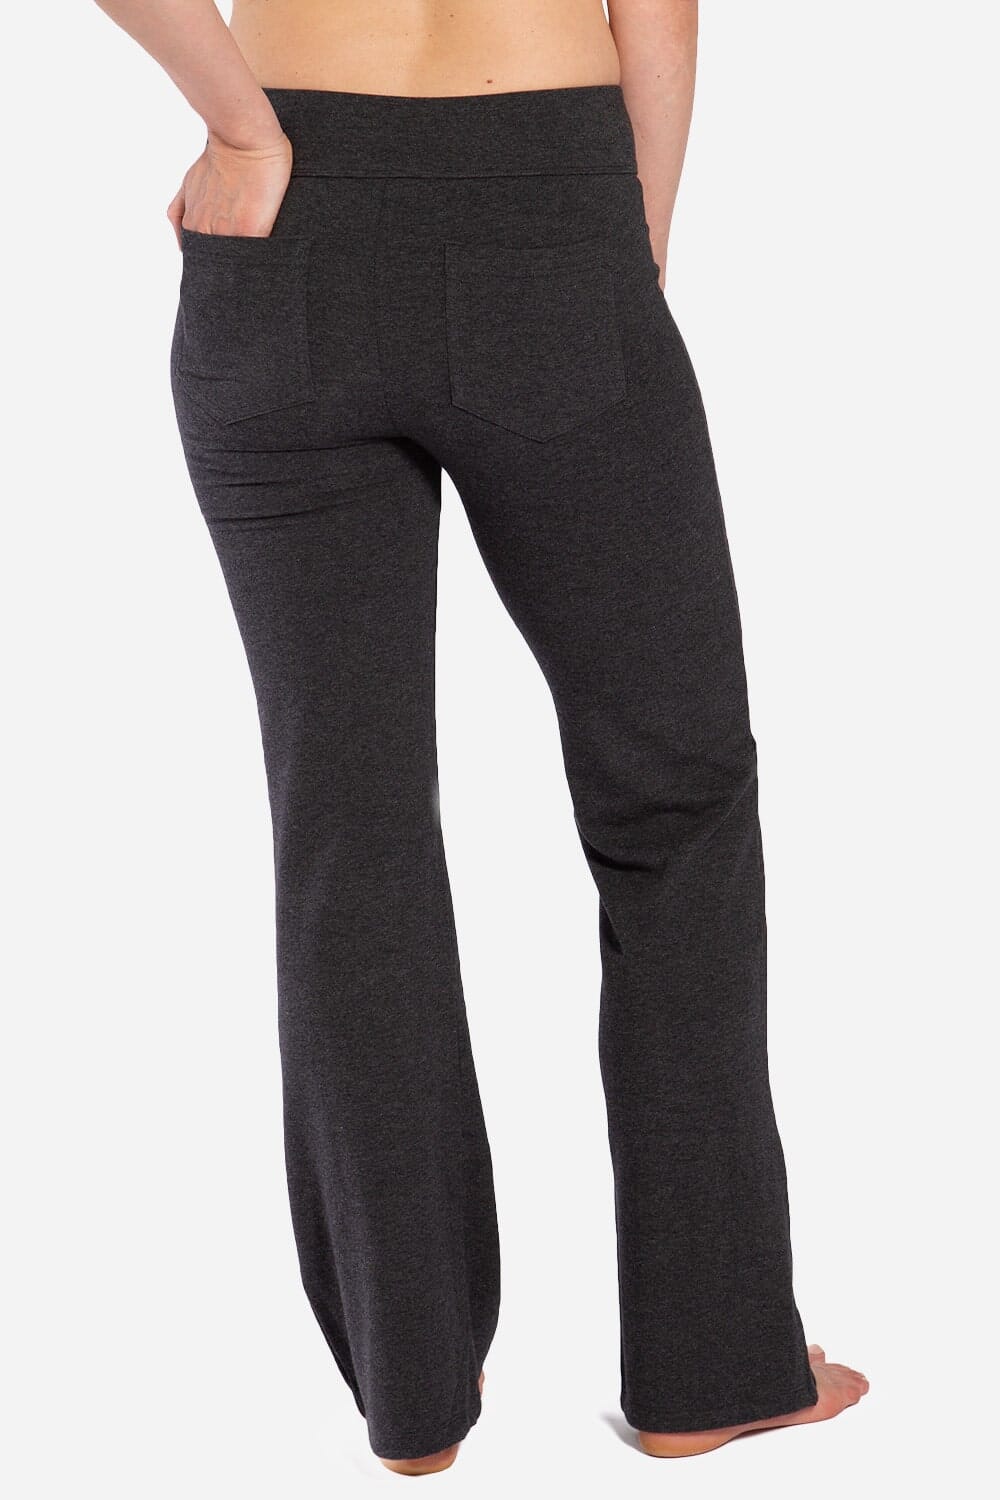  Zeronic Bootcut Yoga Pants for Women with Pockets High